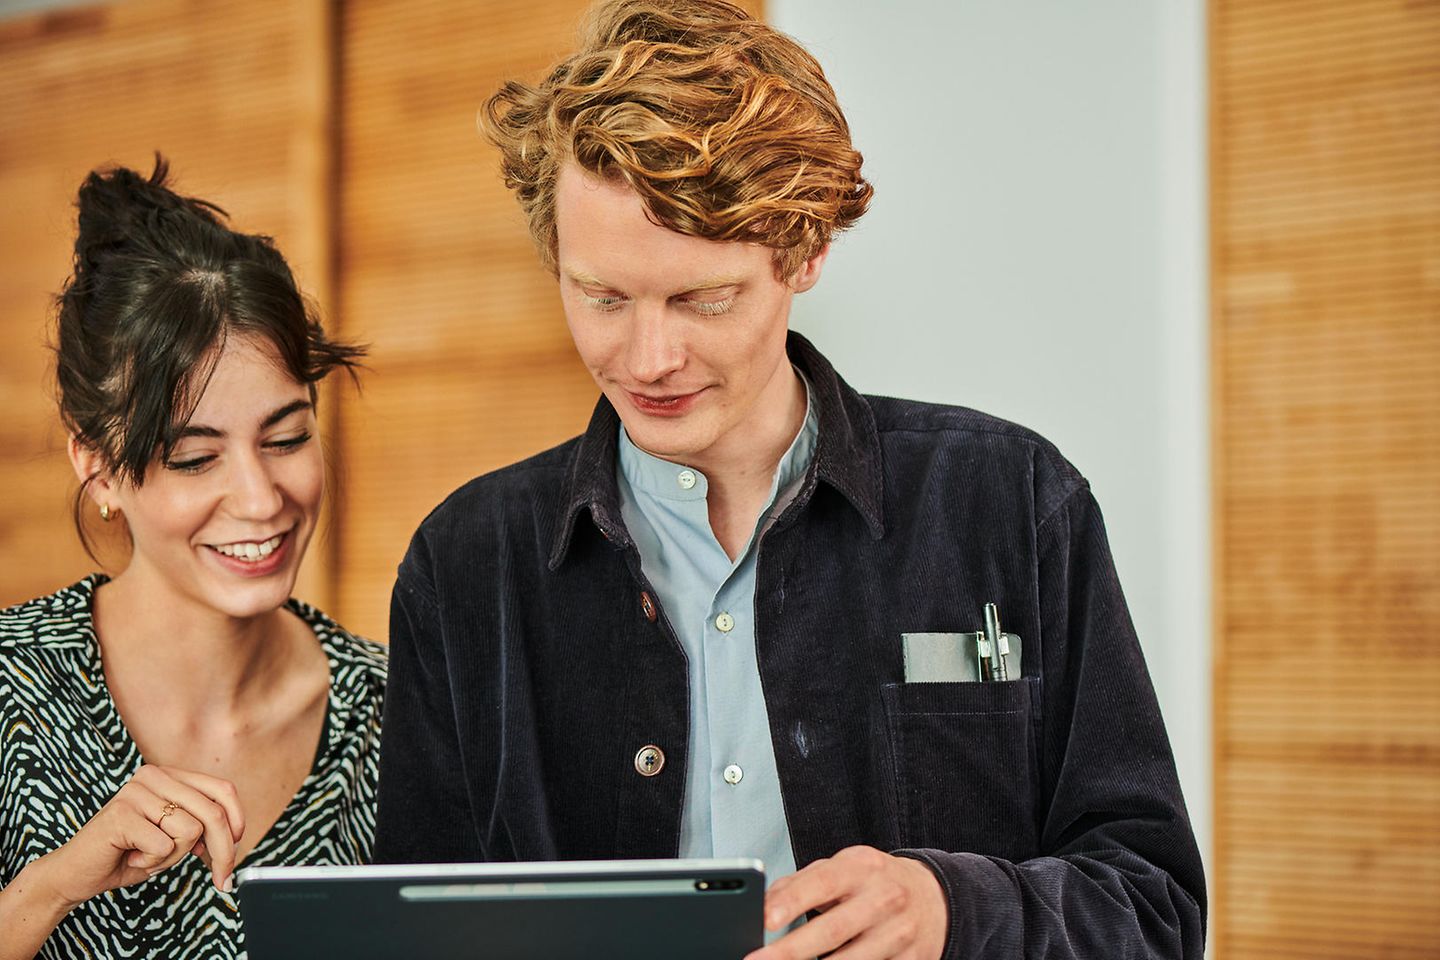 A man and a woman are looking at an iPad together, smiling.